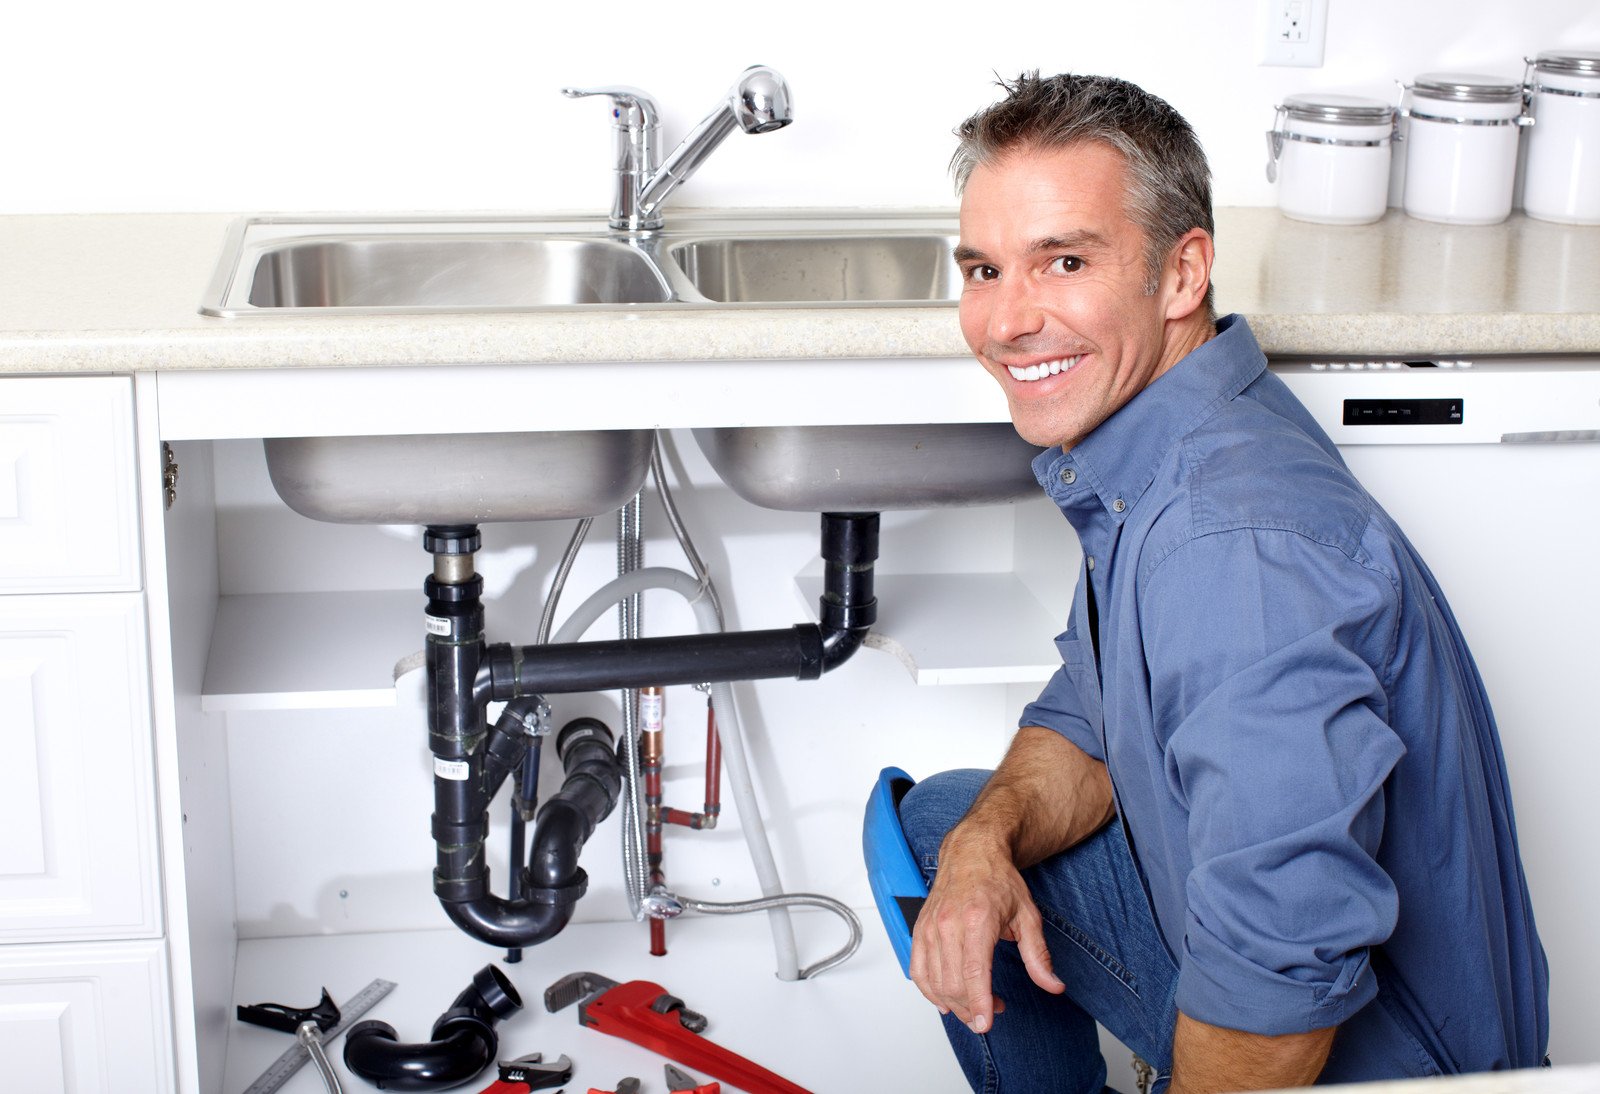 Toilet Troubles? Plumbing Professional to the Rescue!